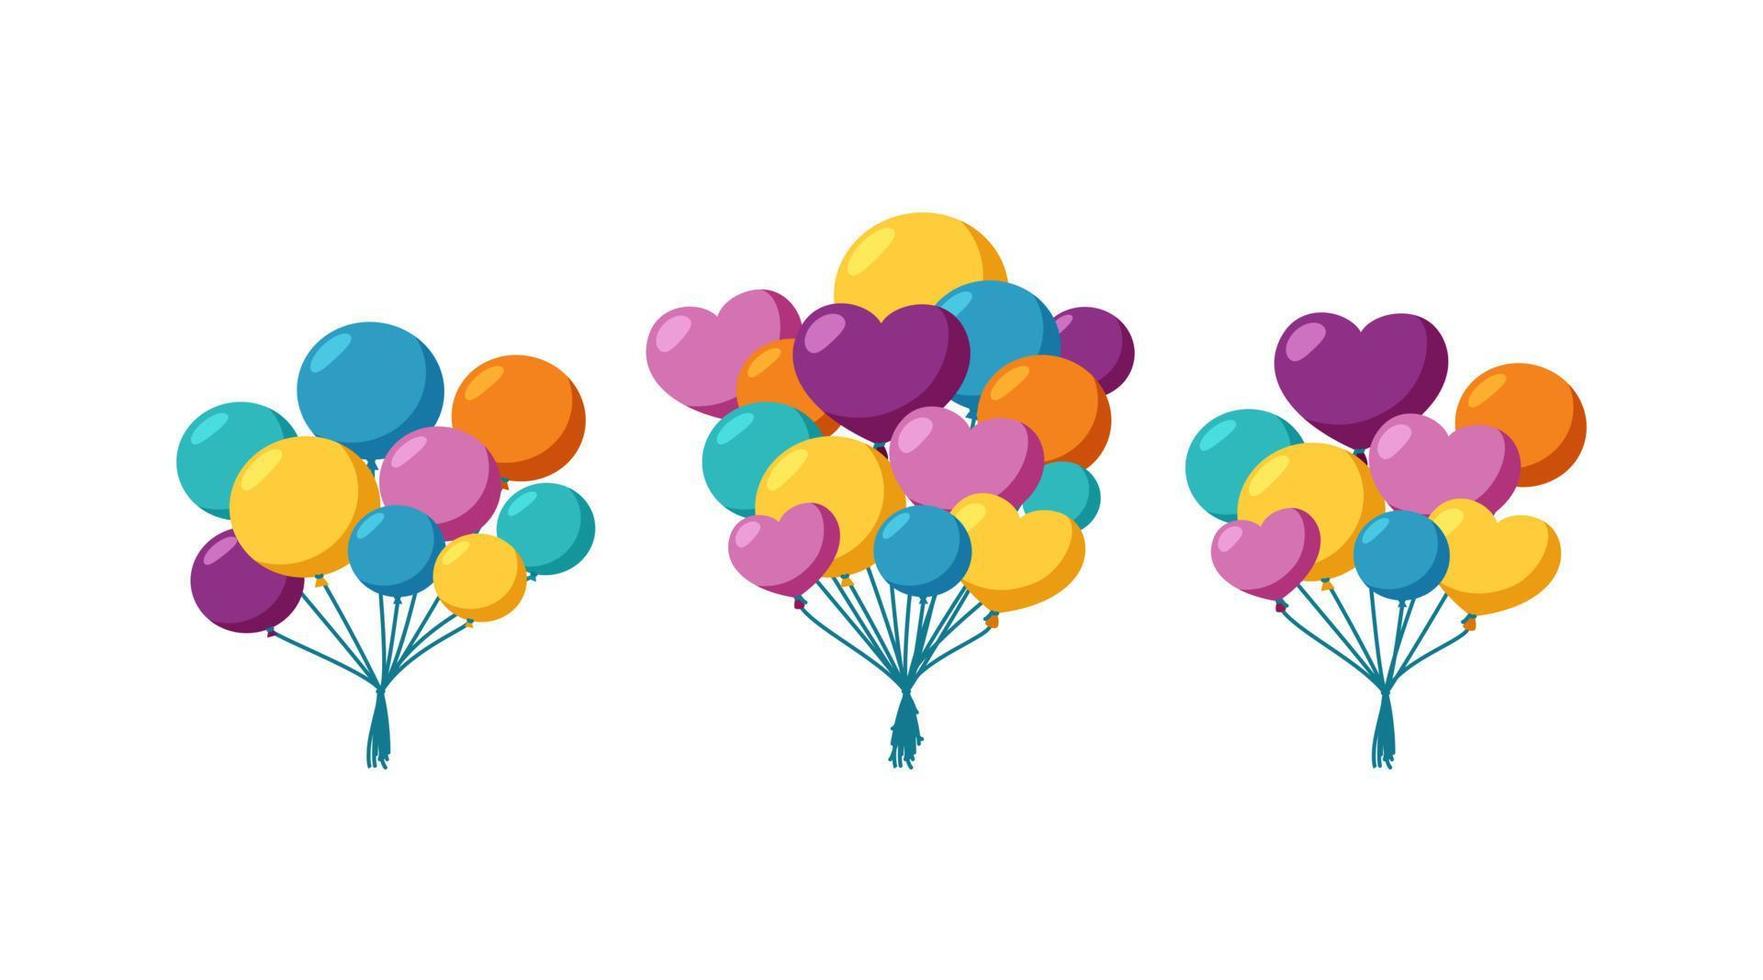 Balloons for a holiday. Set of helium balloons bunches. Vector illustration in cartoon style